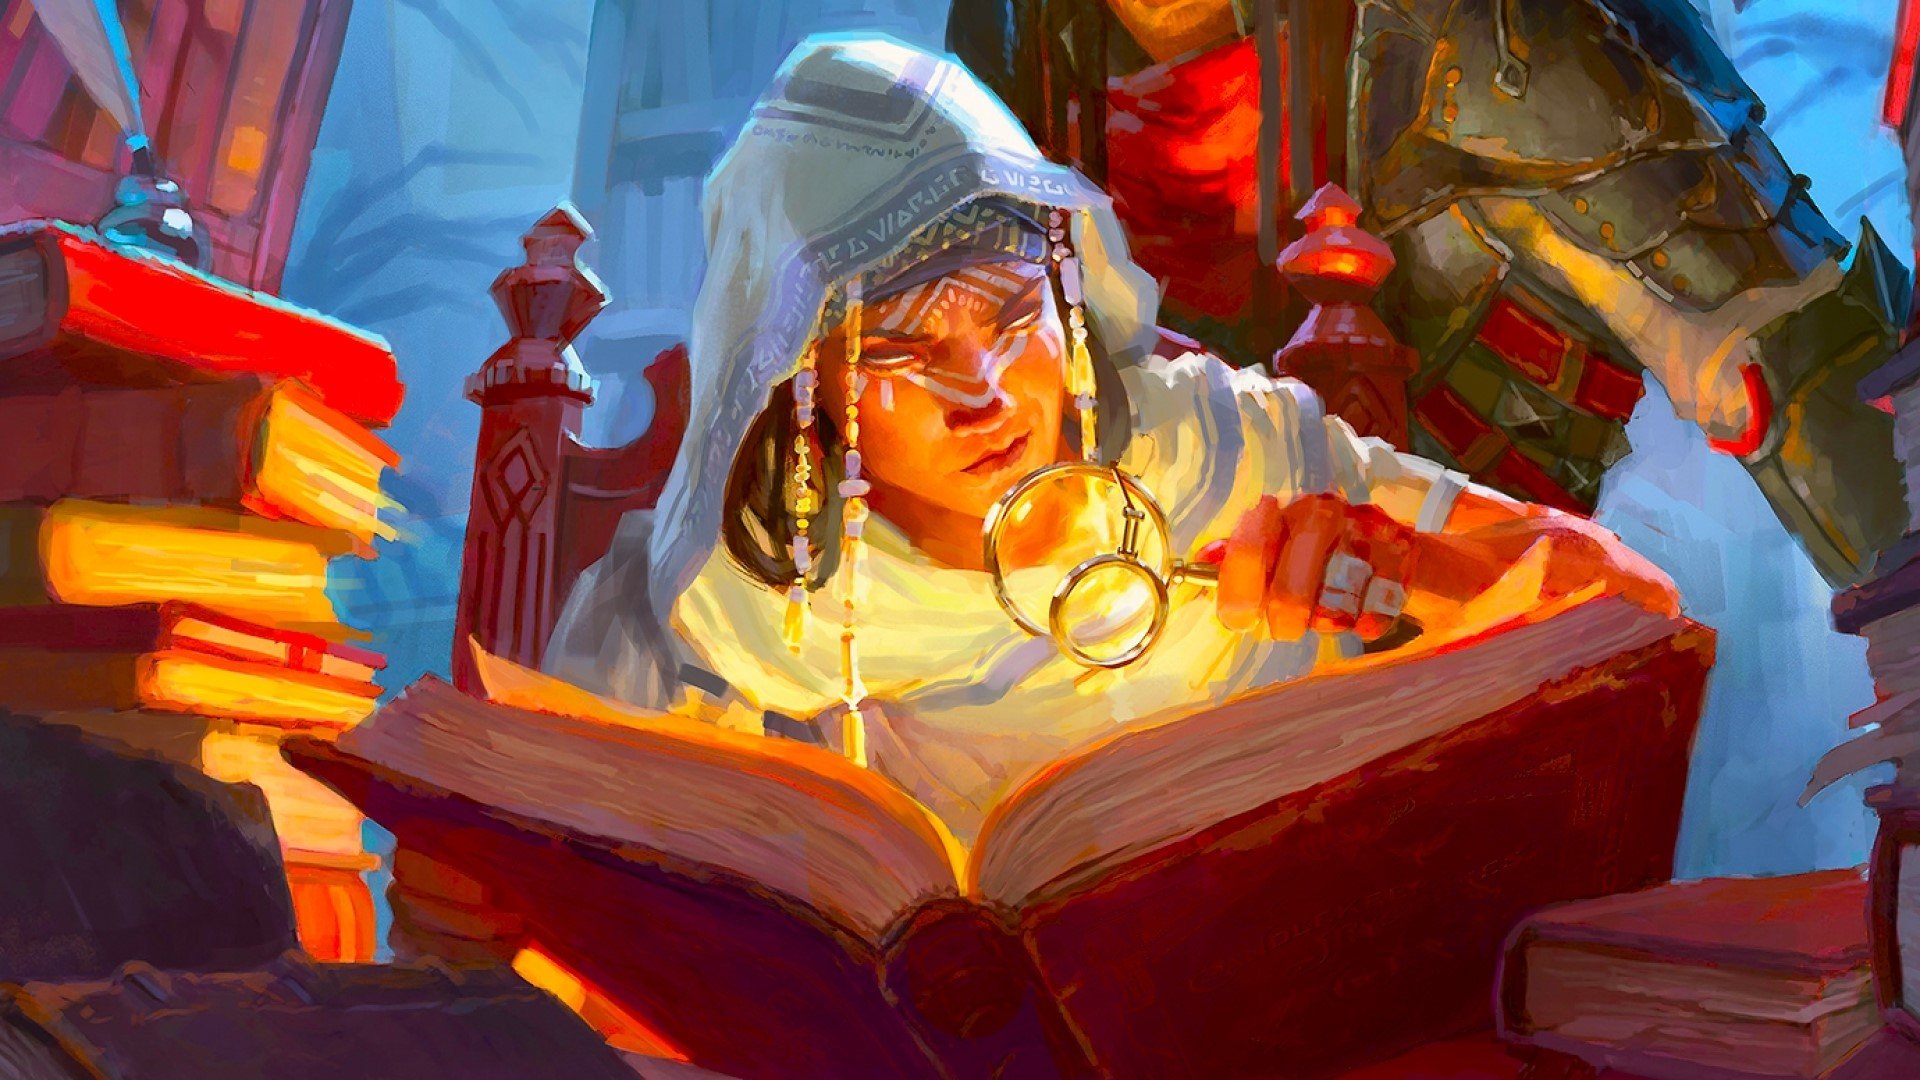 DnD human 5e reading in a library